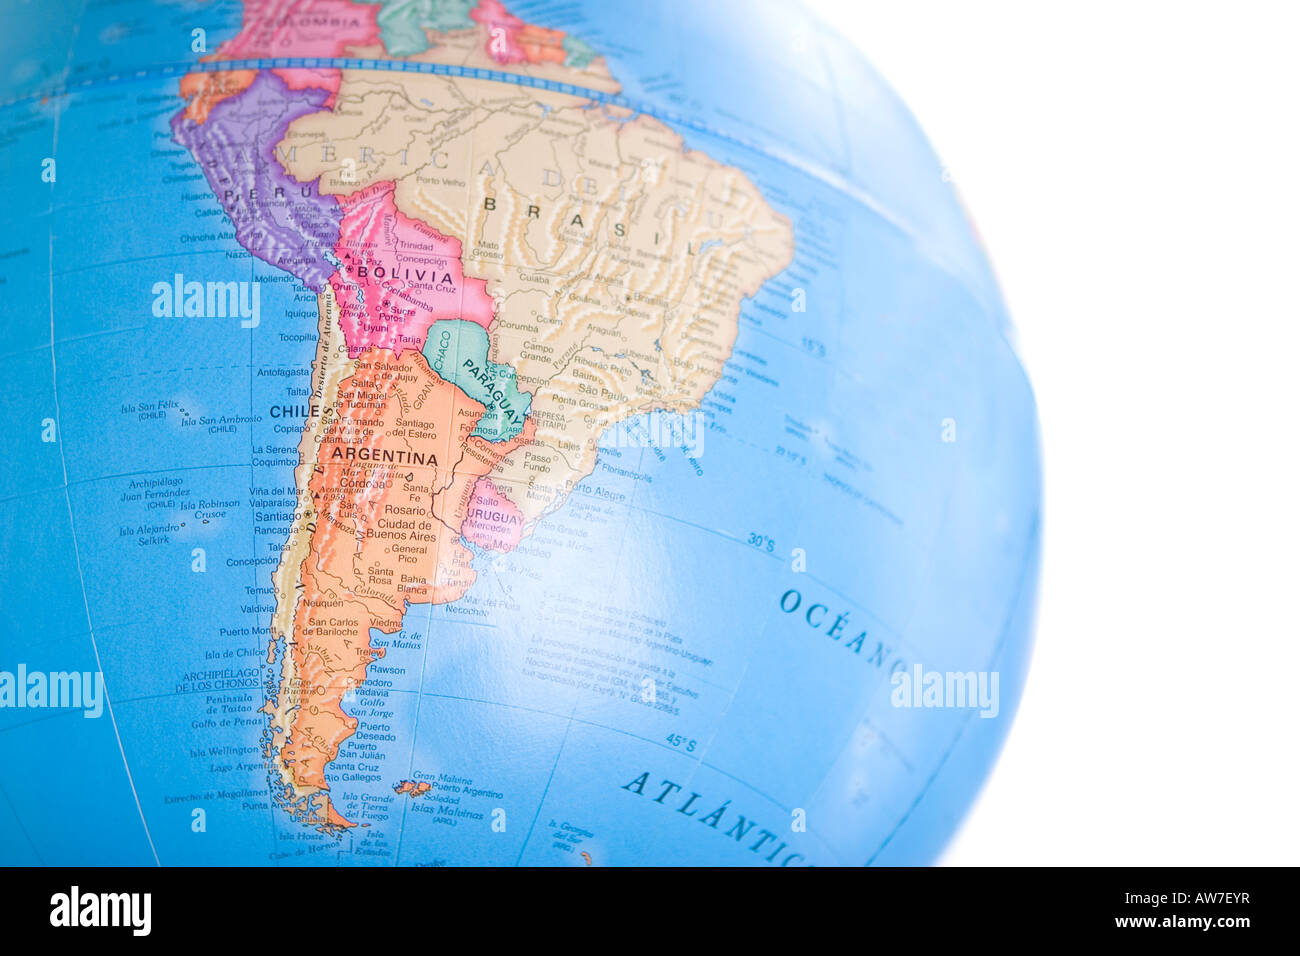 Globe world map featuring South America with shallow depth of field Stock Photo